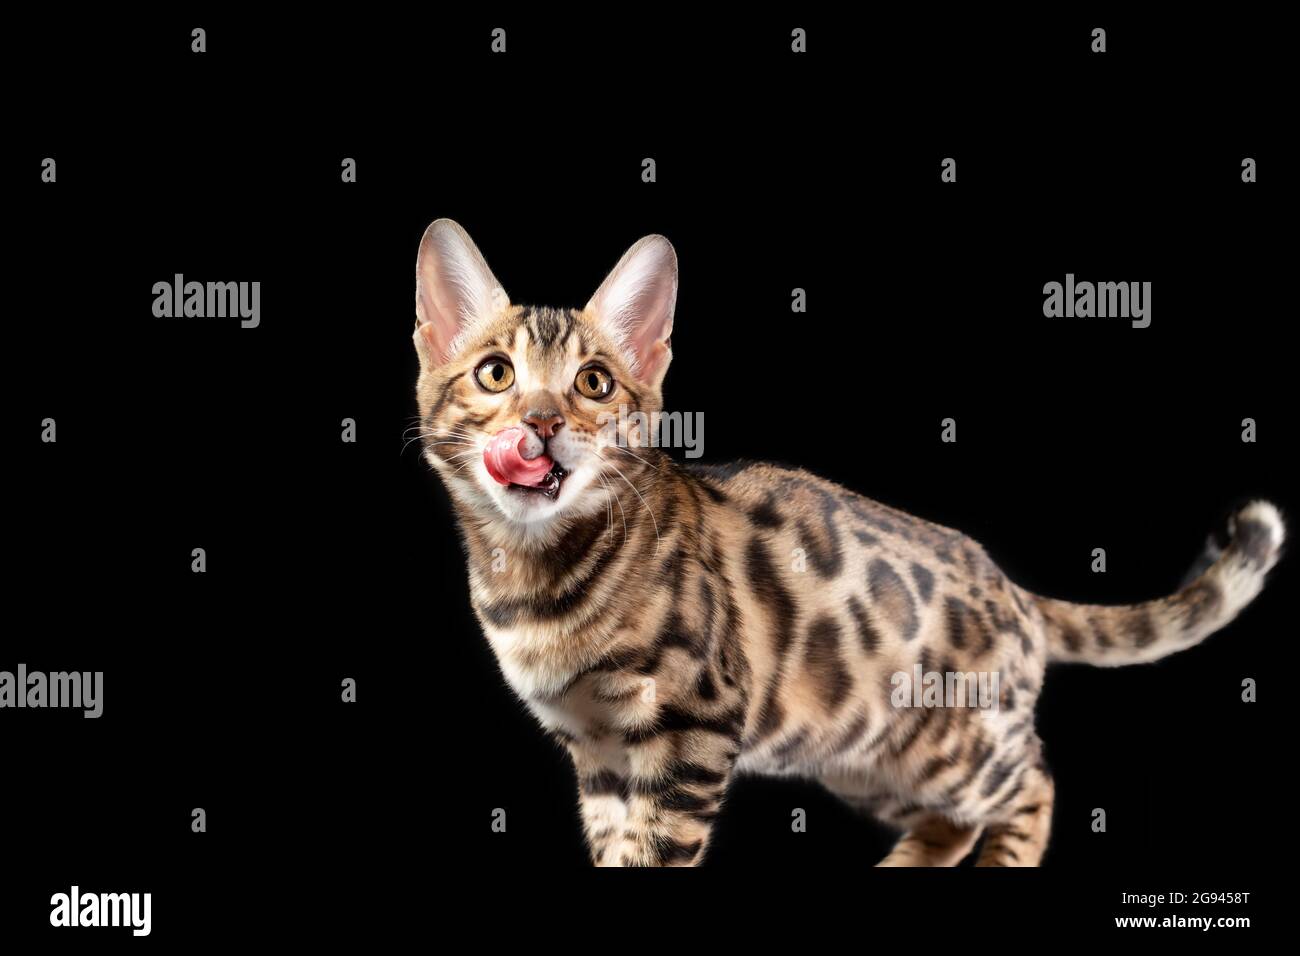 Kitten of bengal cat with tongue out isolated at black background Stock Photo